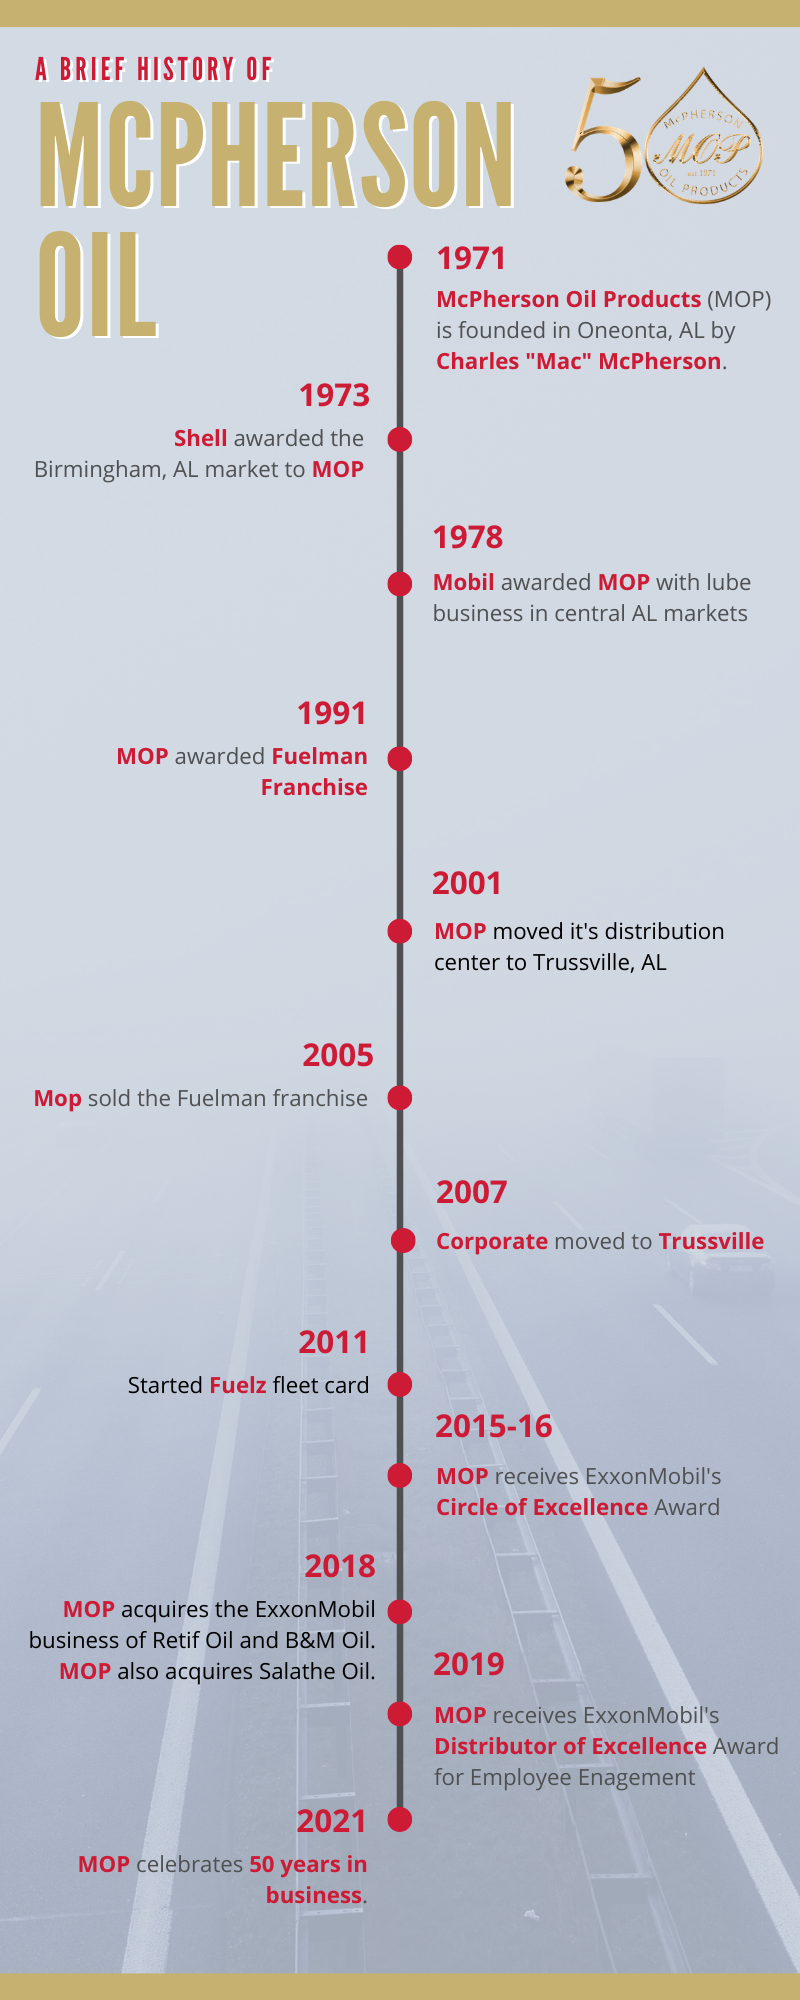 A timeline of McPherson Oil's history